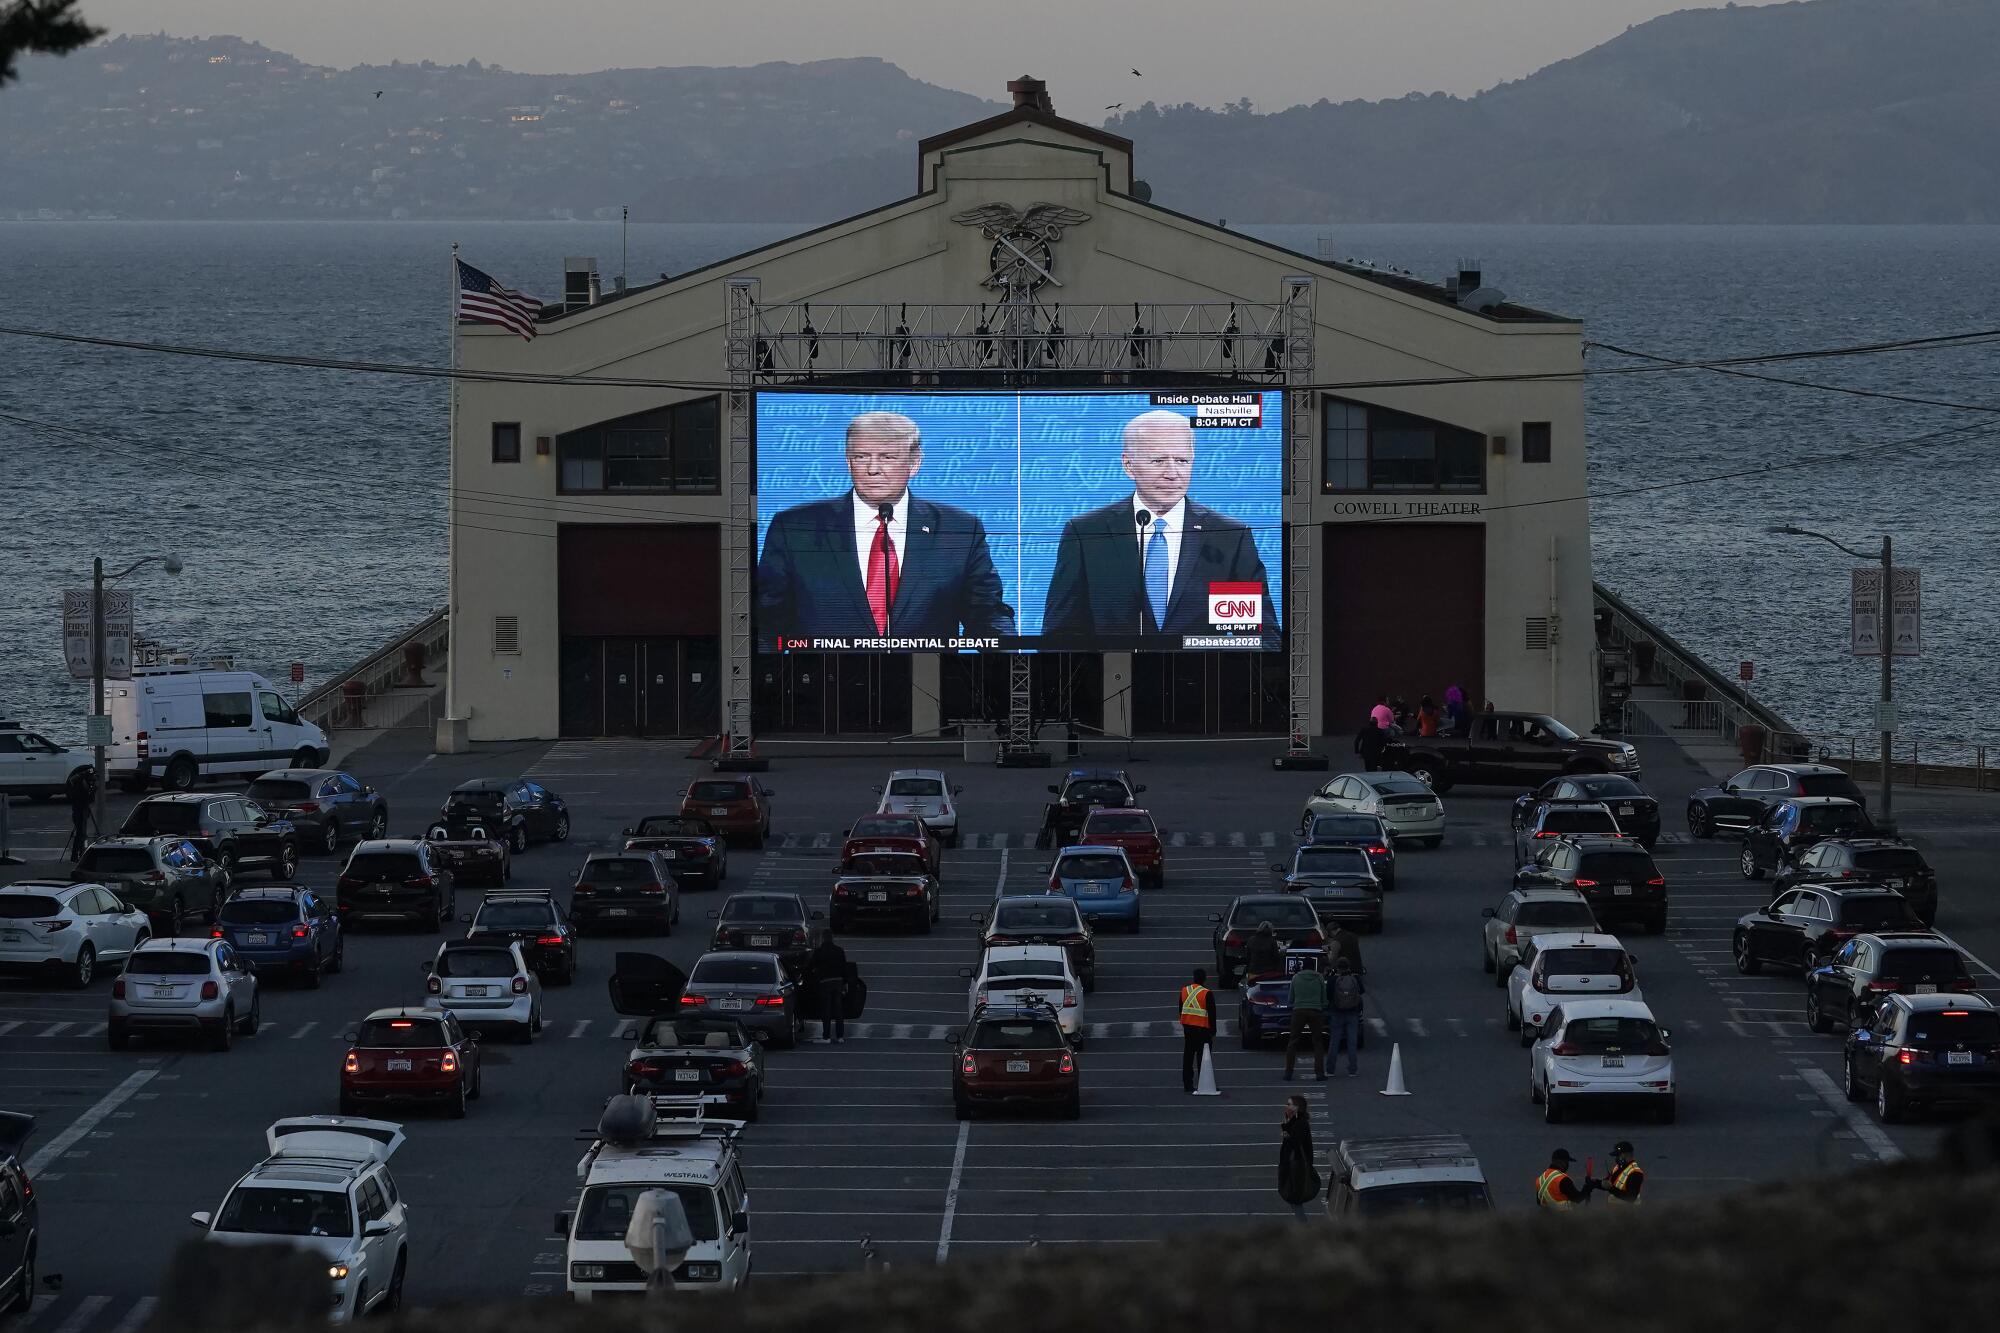 Cars parked in front of a large outdoor video screen showing the debate